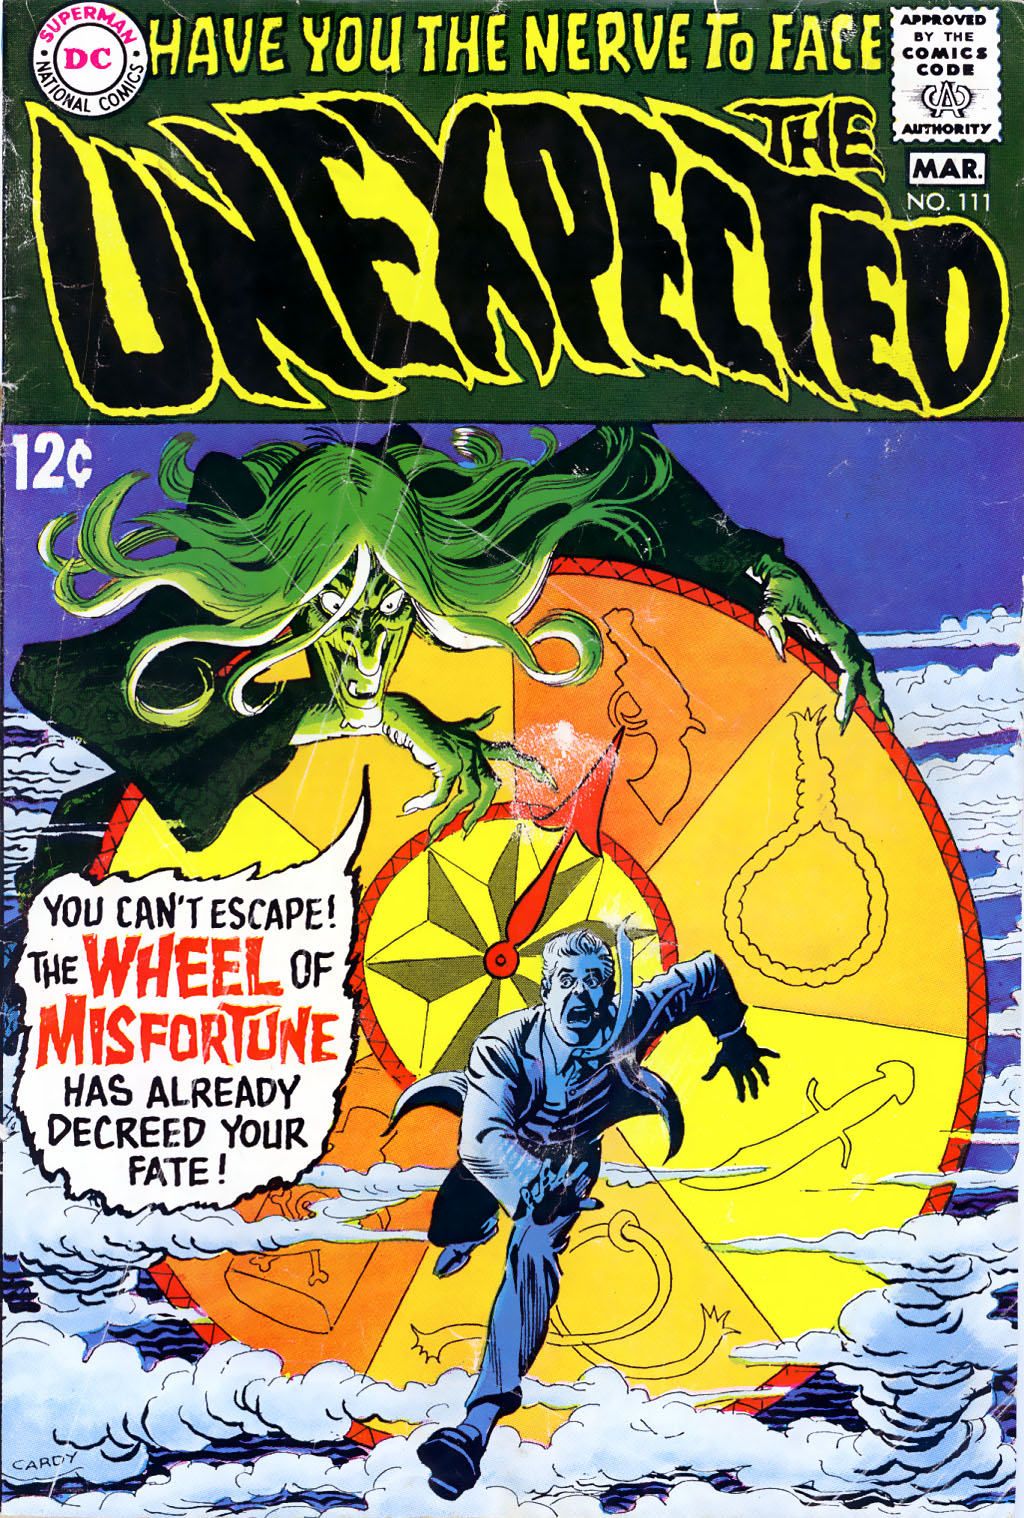 Read online Tales of the Unexpected comic -  Issue #111 - 1